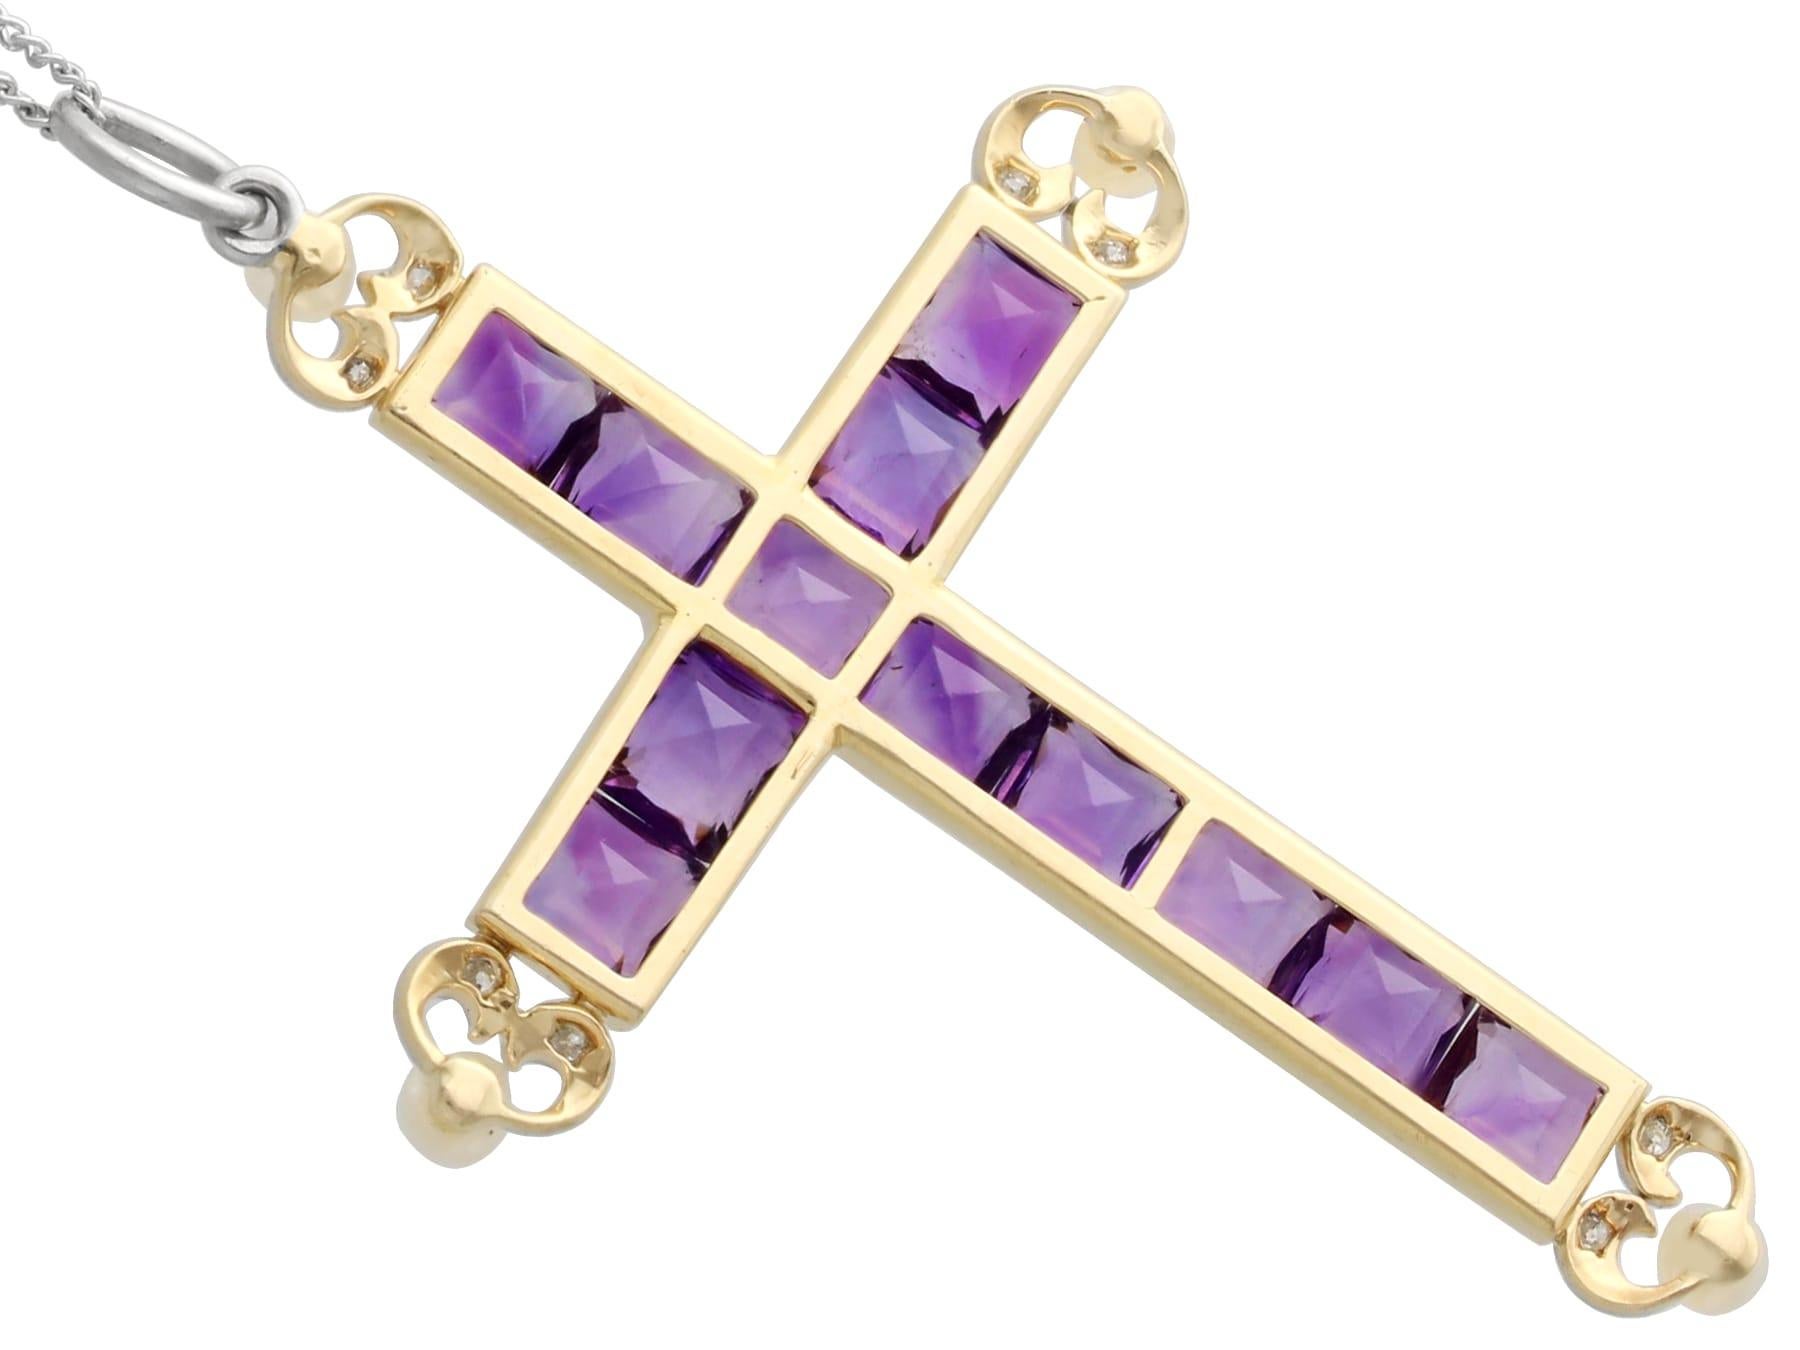 Antique 6 Carat Amethyst, Pearl and 18k Yellow Gold Cross Pendant Circa 1880 In Excellent Condition For Sale In Jesmond, Newcastle Upon Tyne